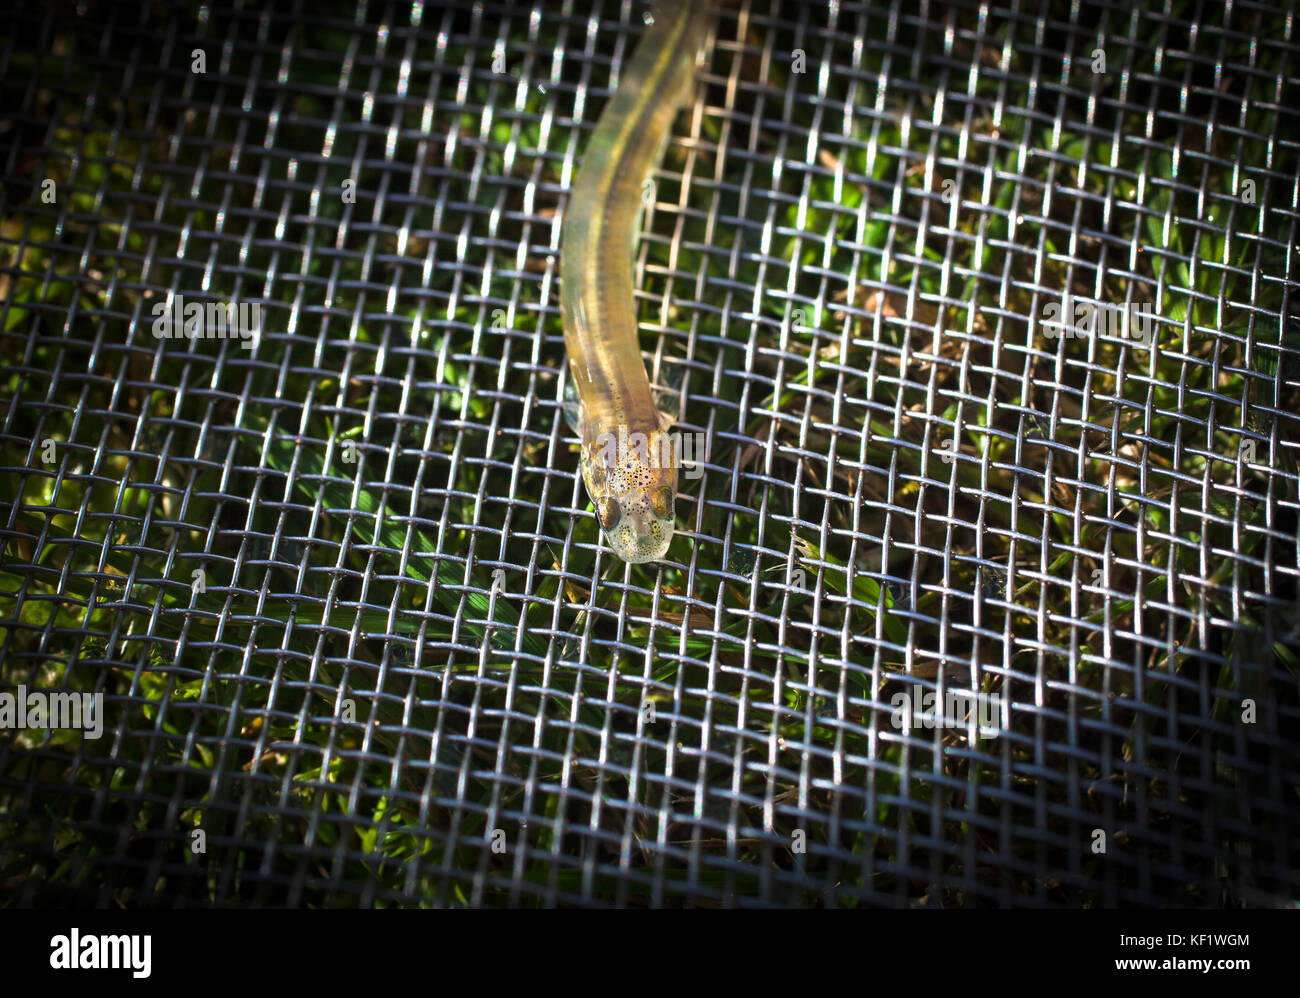 Minnow Bait Trap High Resolution Stock Photography and Images - Alamy